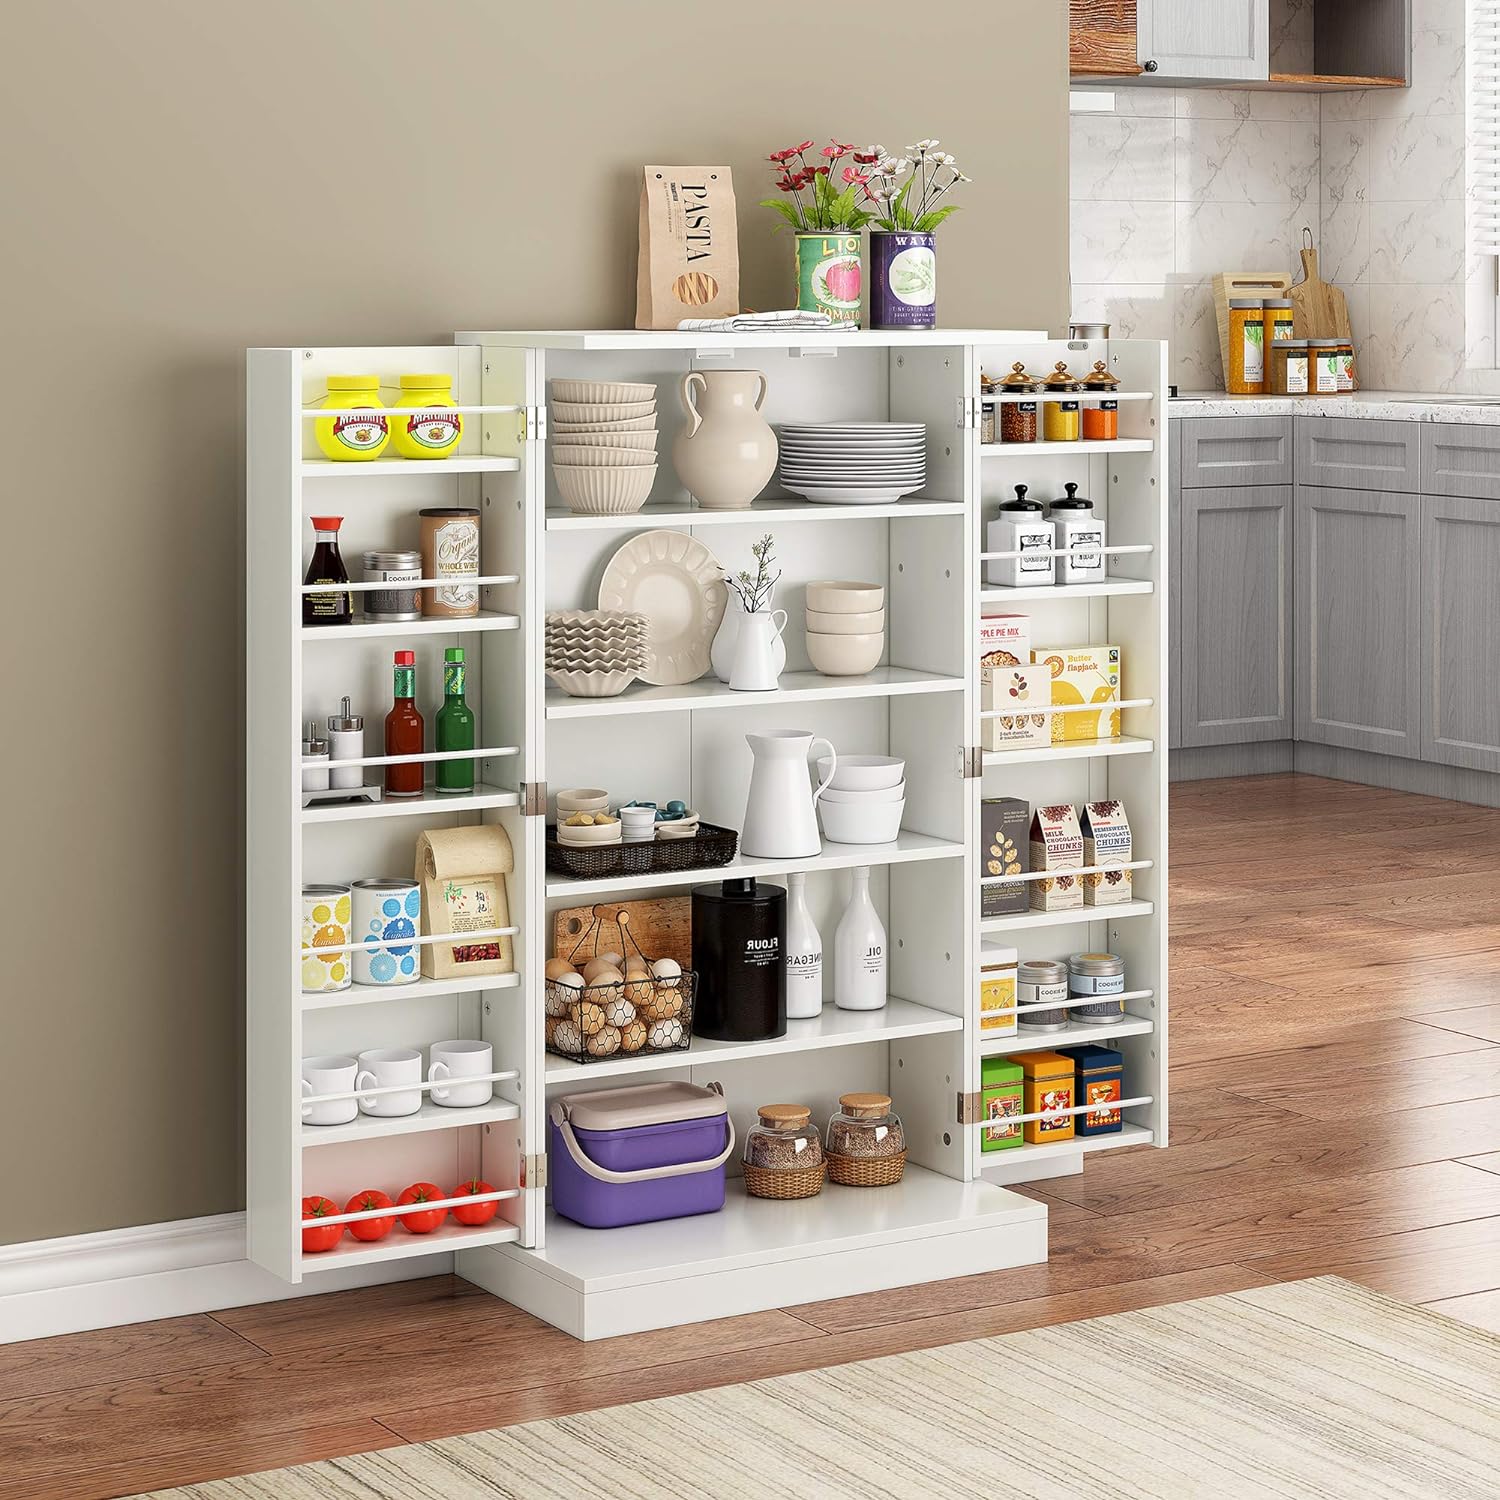 Function Home 41 Kitchen Pantry, White Storage Cabinets With Doors And Shelves